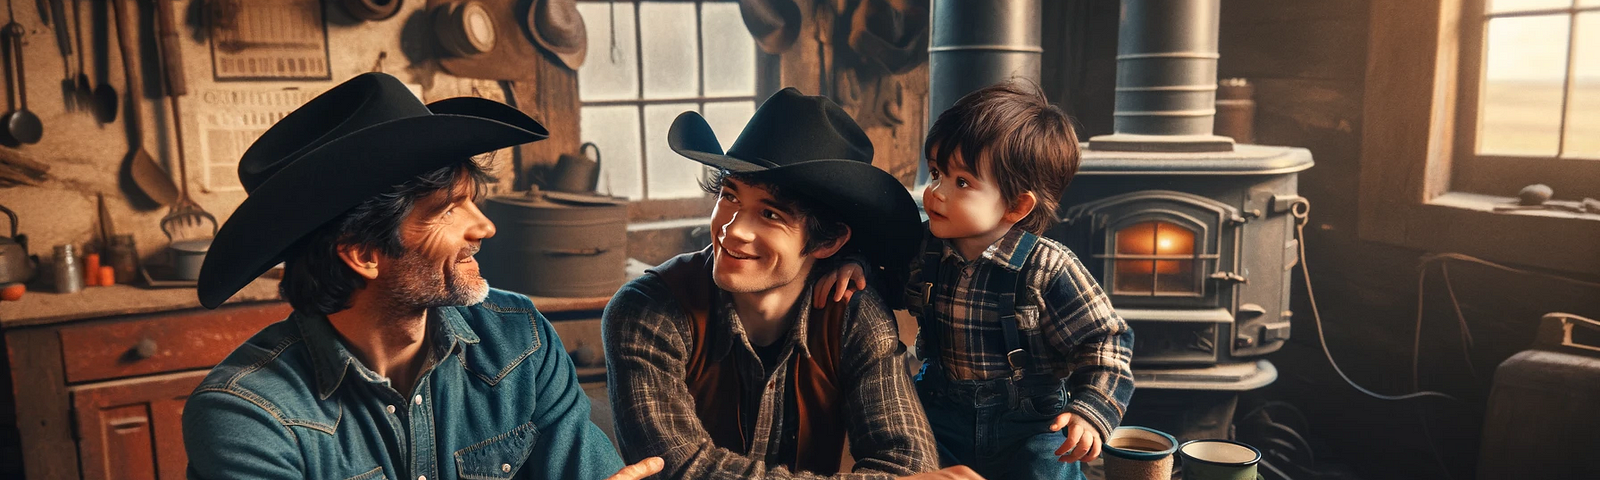 Two guys in cowboy hats plus a small child